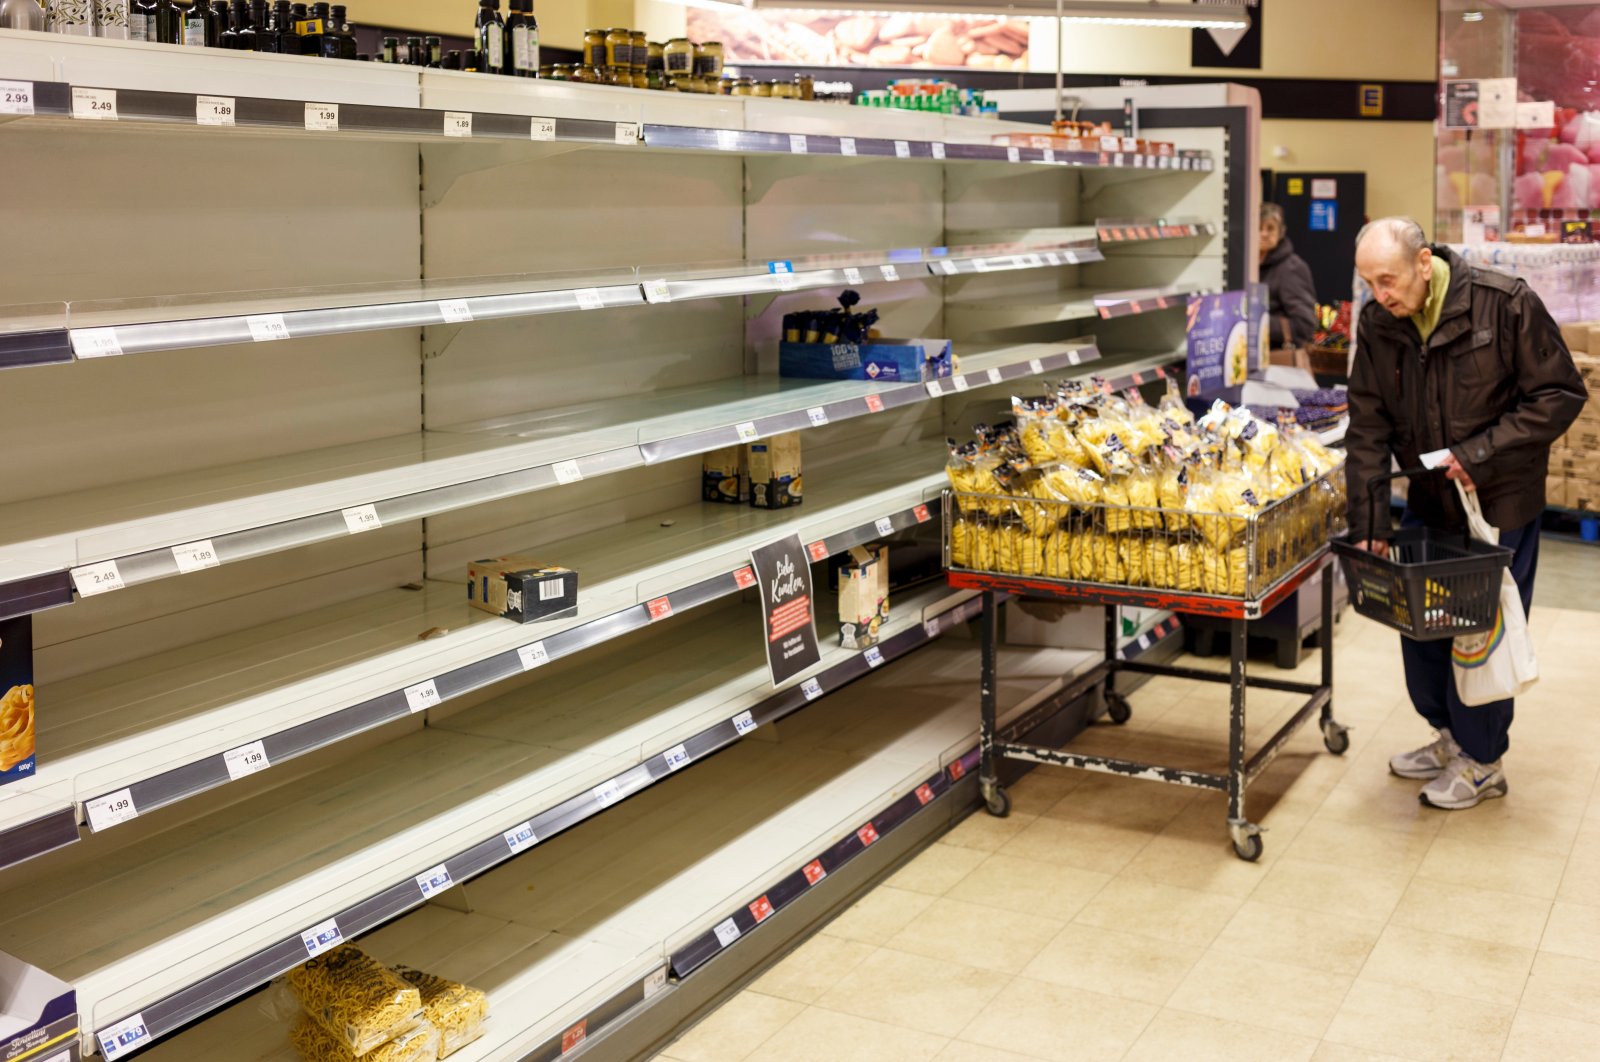 A senior citizen next to empty supermarket shelves cleared due to panic buying because of widespread fear early in the COVID-19 pandemic, Berlin, Germany, March 18, 2020. (Shutterstock File Photo)